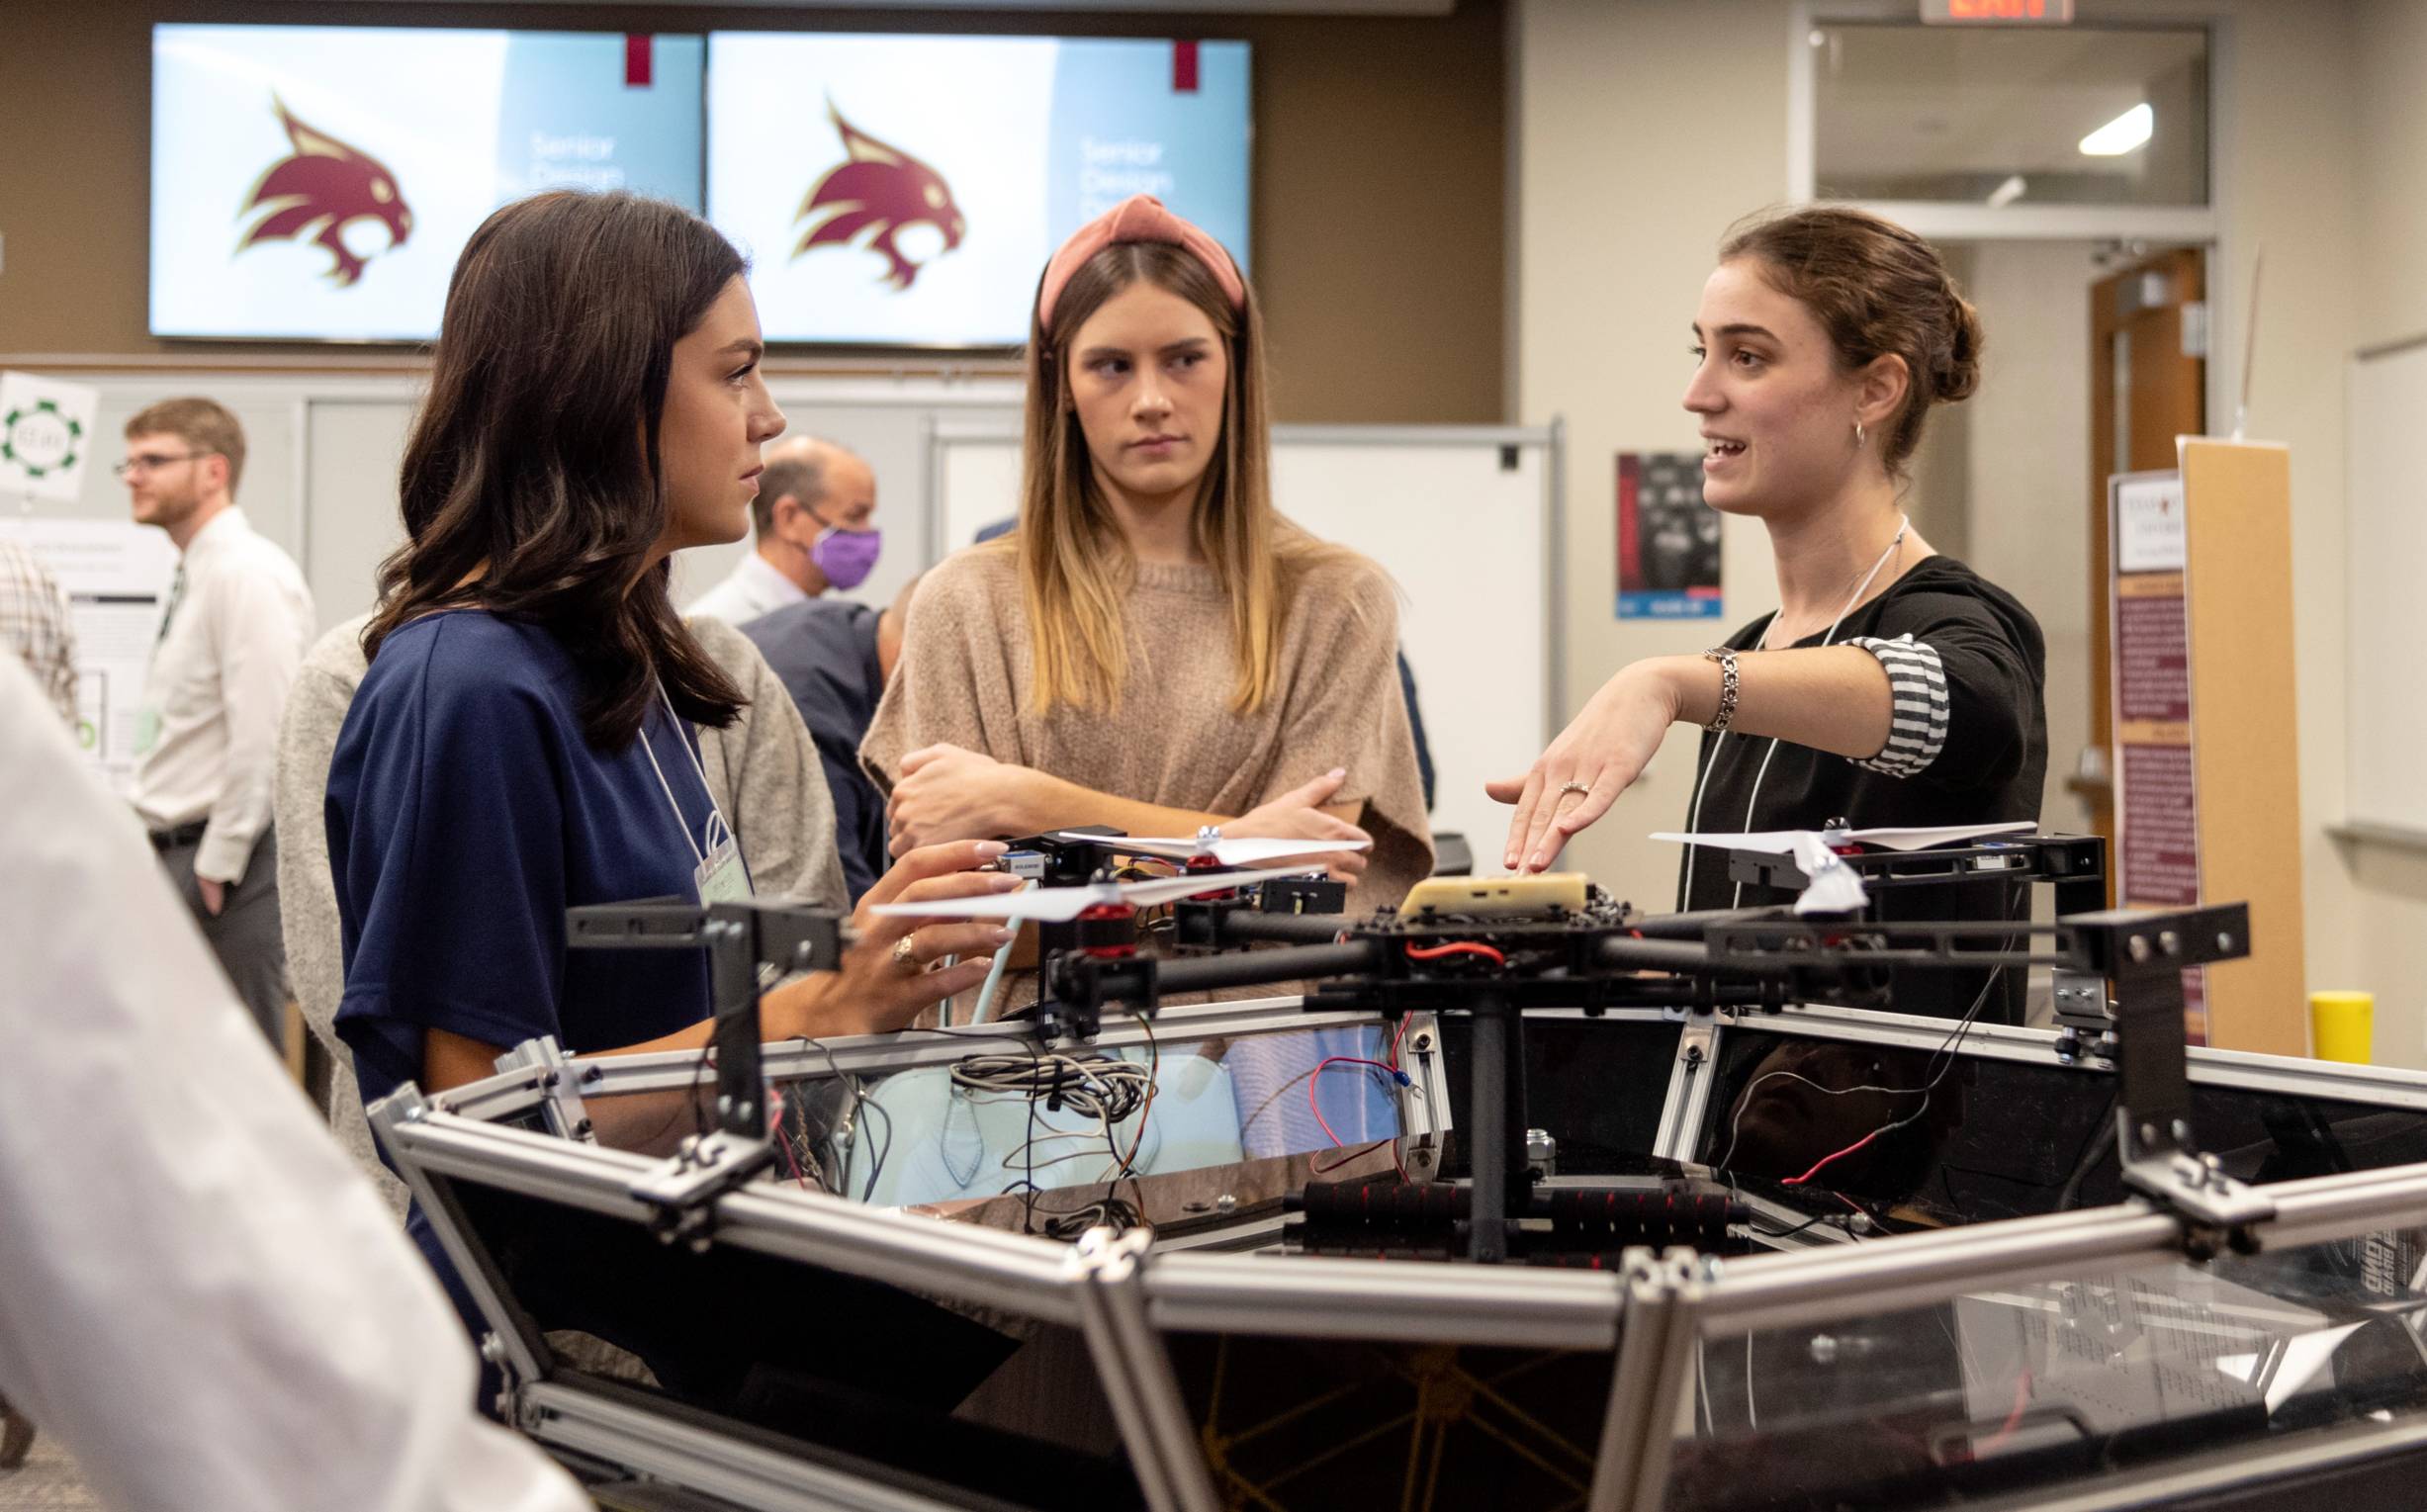 three female engineering students discussing a senior design engineering project